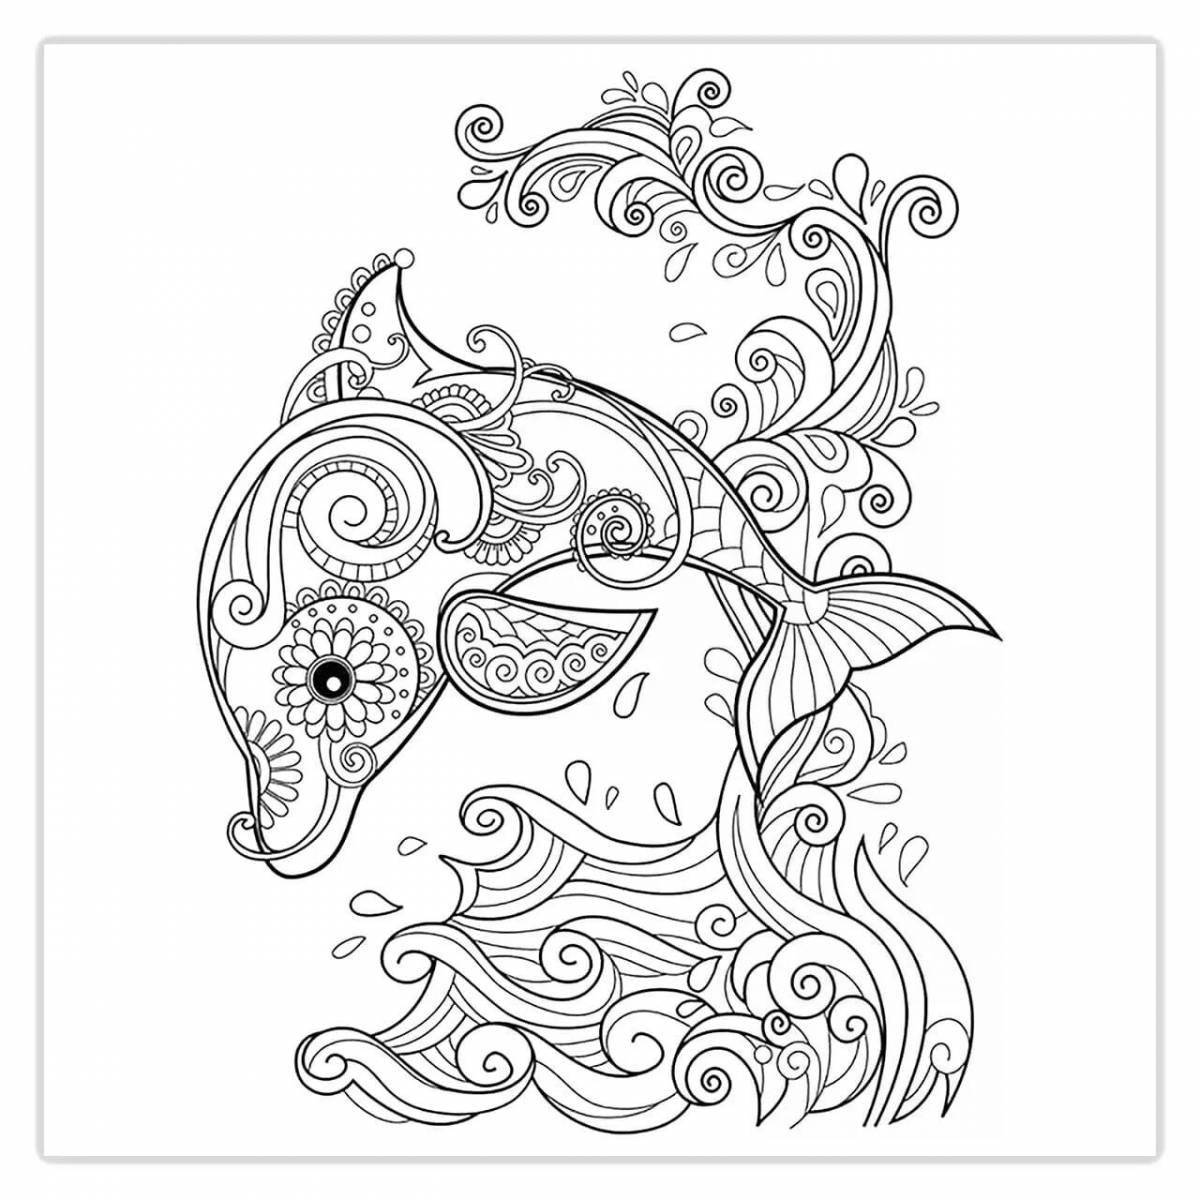 Simple pencil antistress coloring page